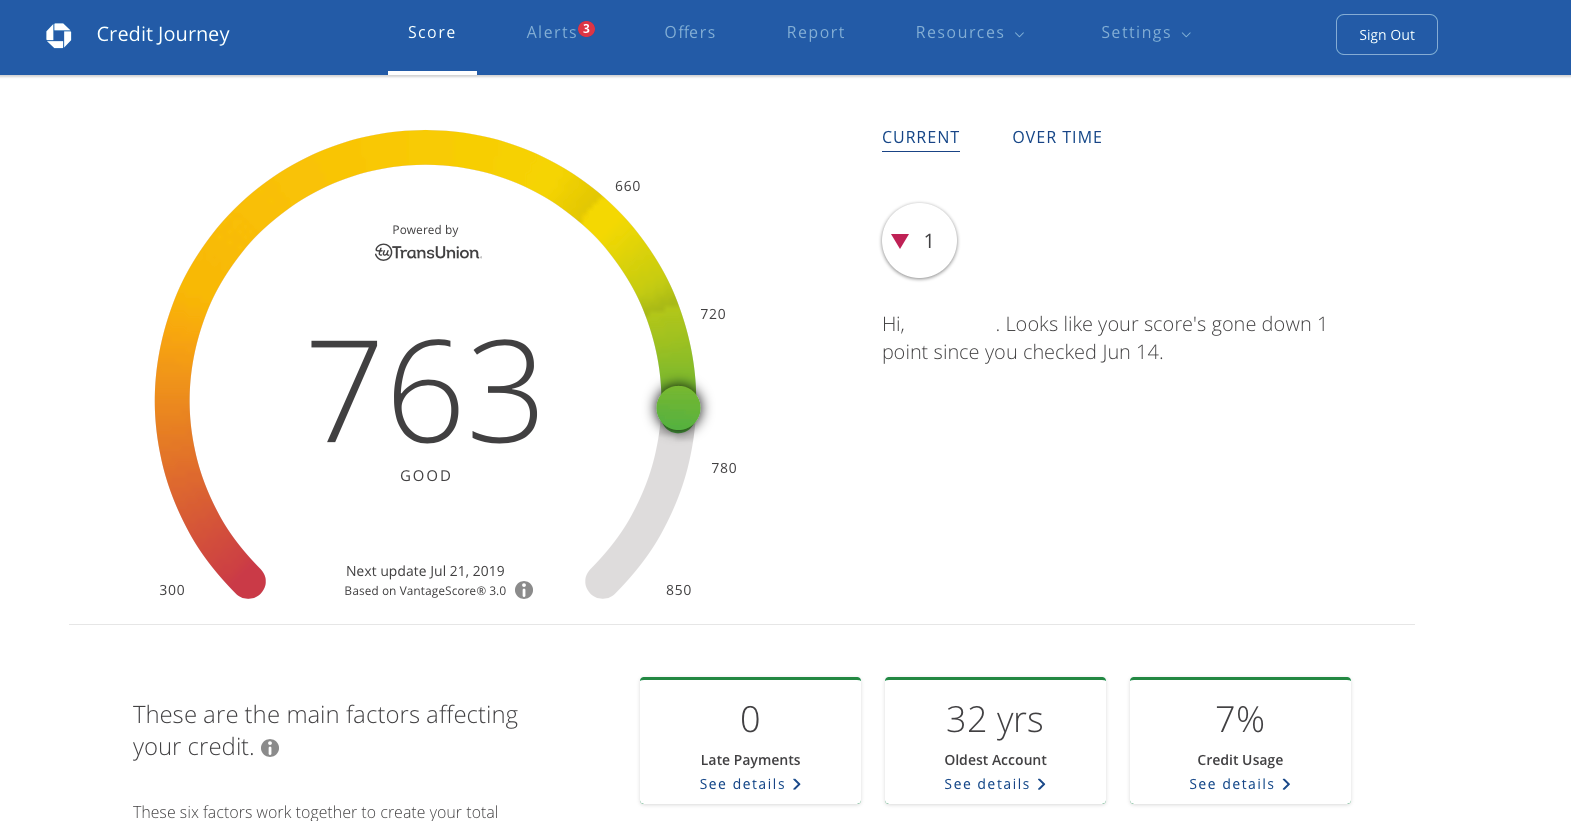 Chase Credit Journey: Check Your Credit Score for Free